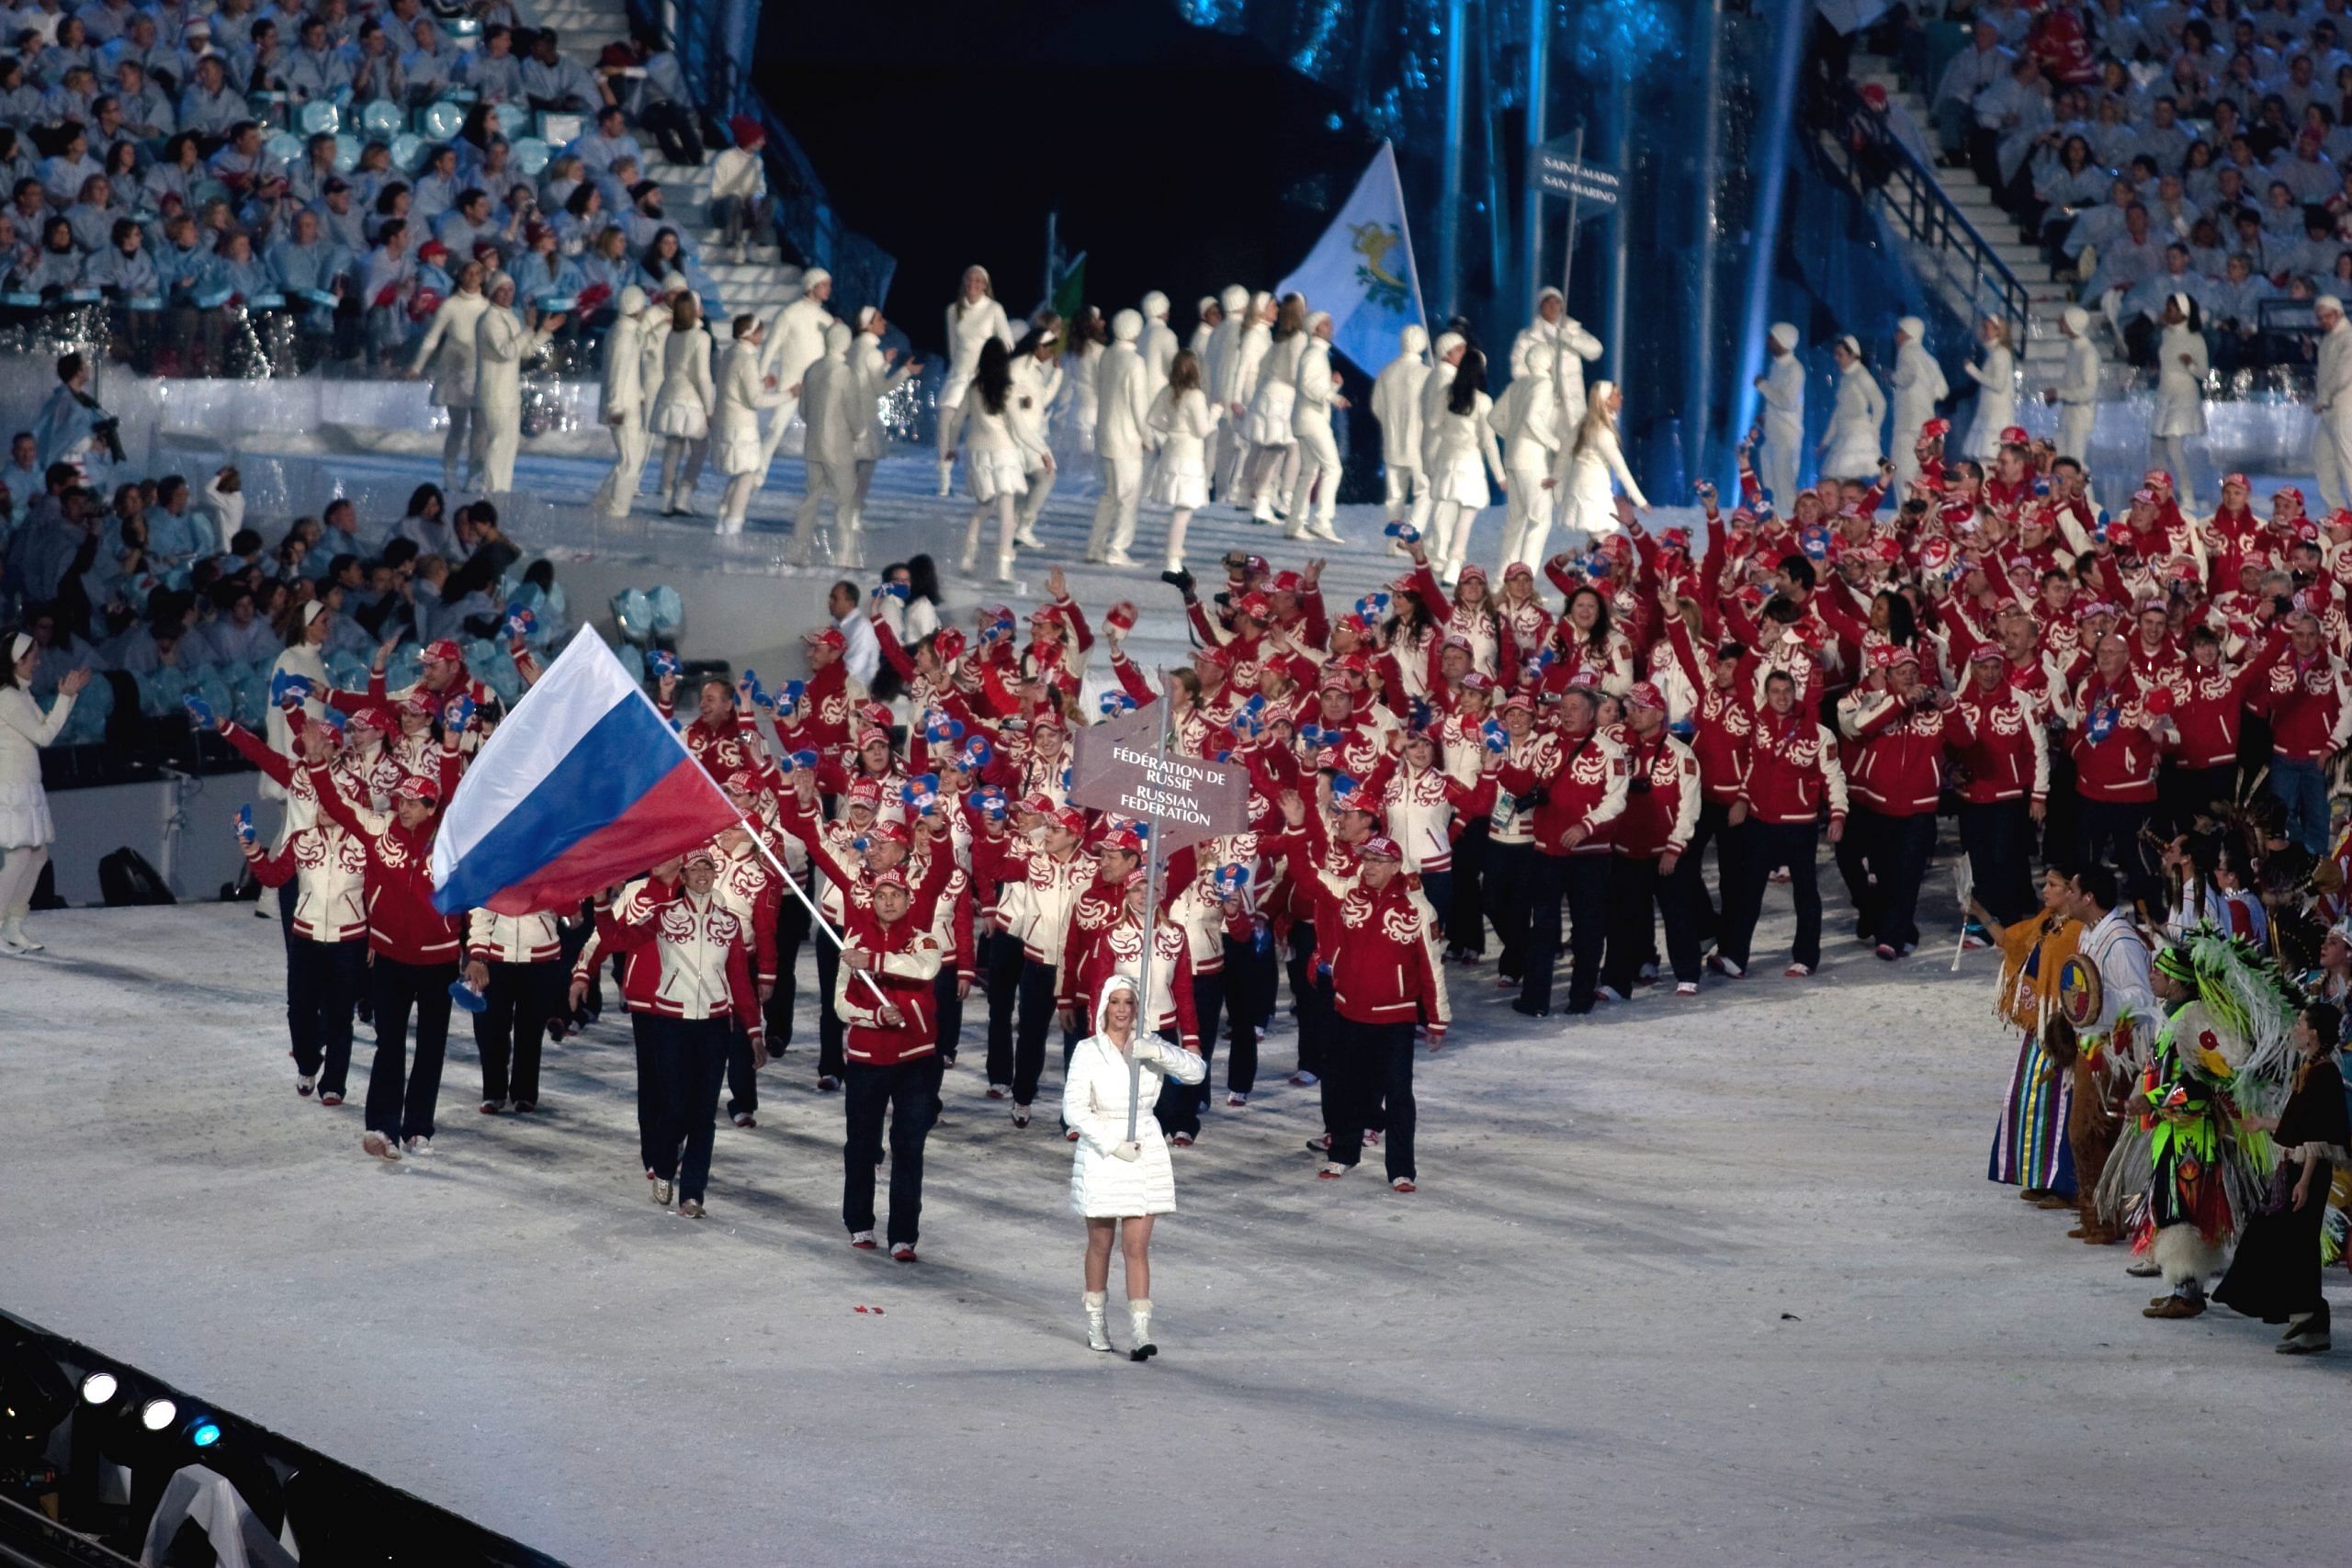 Team Russia at the opening ceremony of the 2010 Olympics | Commons